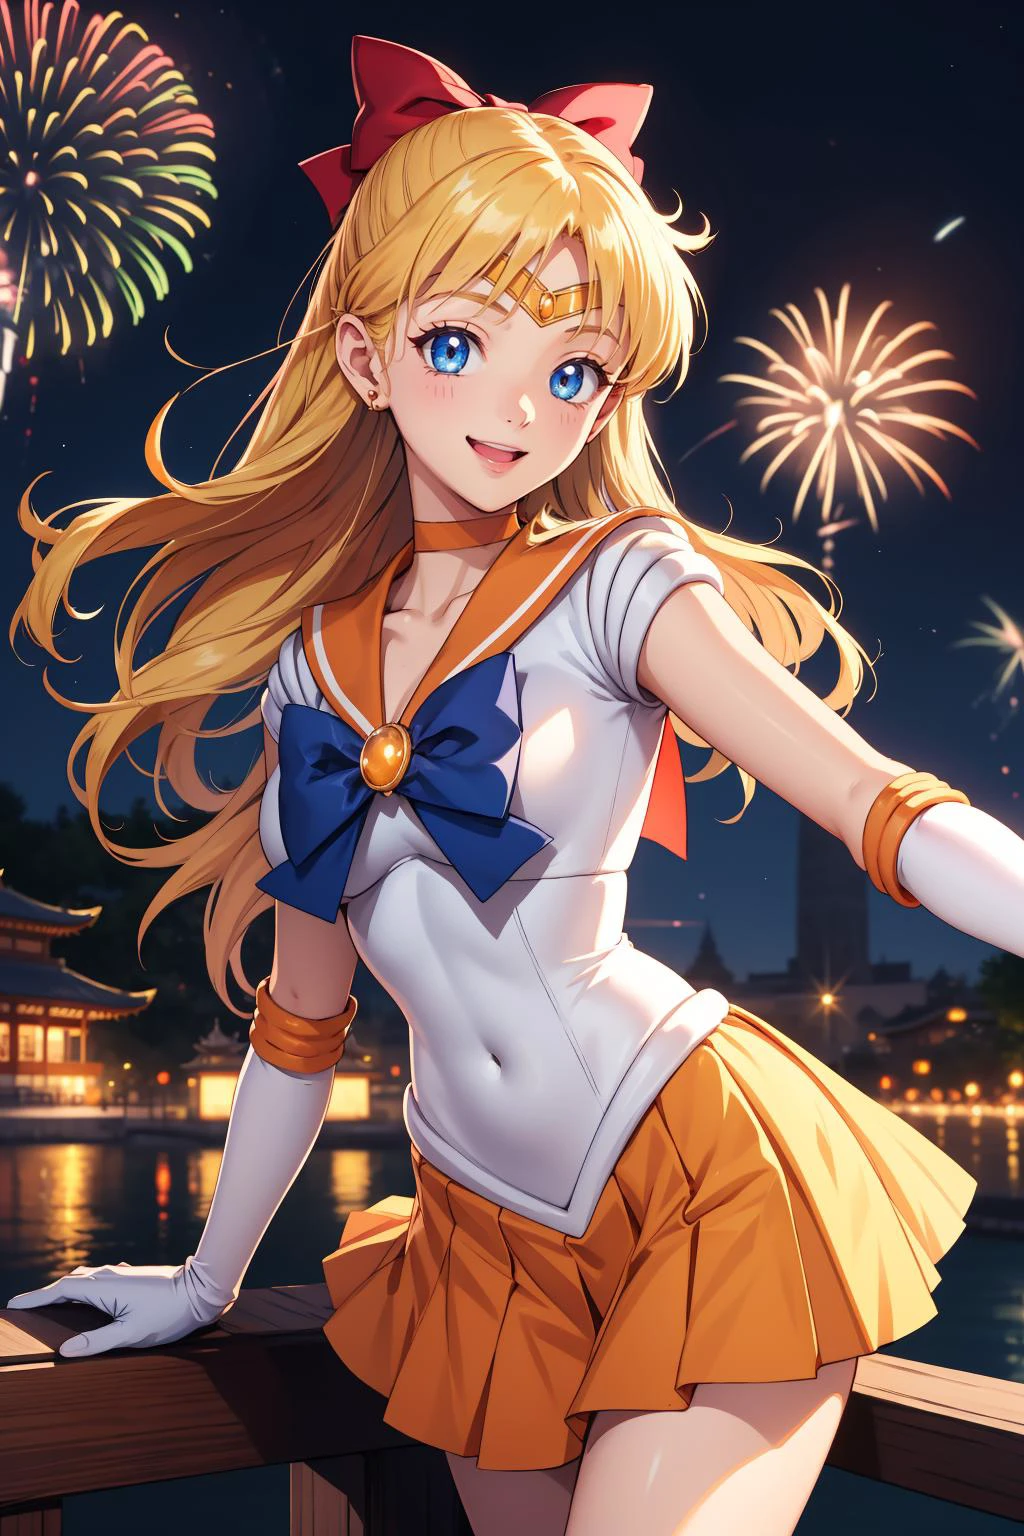 masterpiece, best quality, highres, absurdres, ultra detailed, pretty eyes, perfect pussy
sv1, sailor senshi uniform, orange skirt, elbow gloves, tiara, orange sailor collar, red bow, orange choker, white gloves, jewelry
smile, happy, excited
outside, temple, night fireworks in background
 